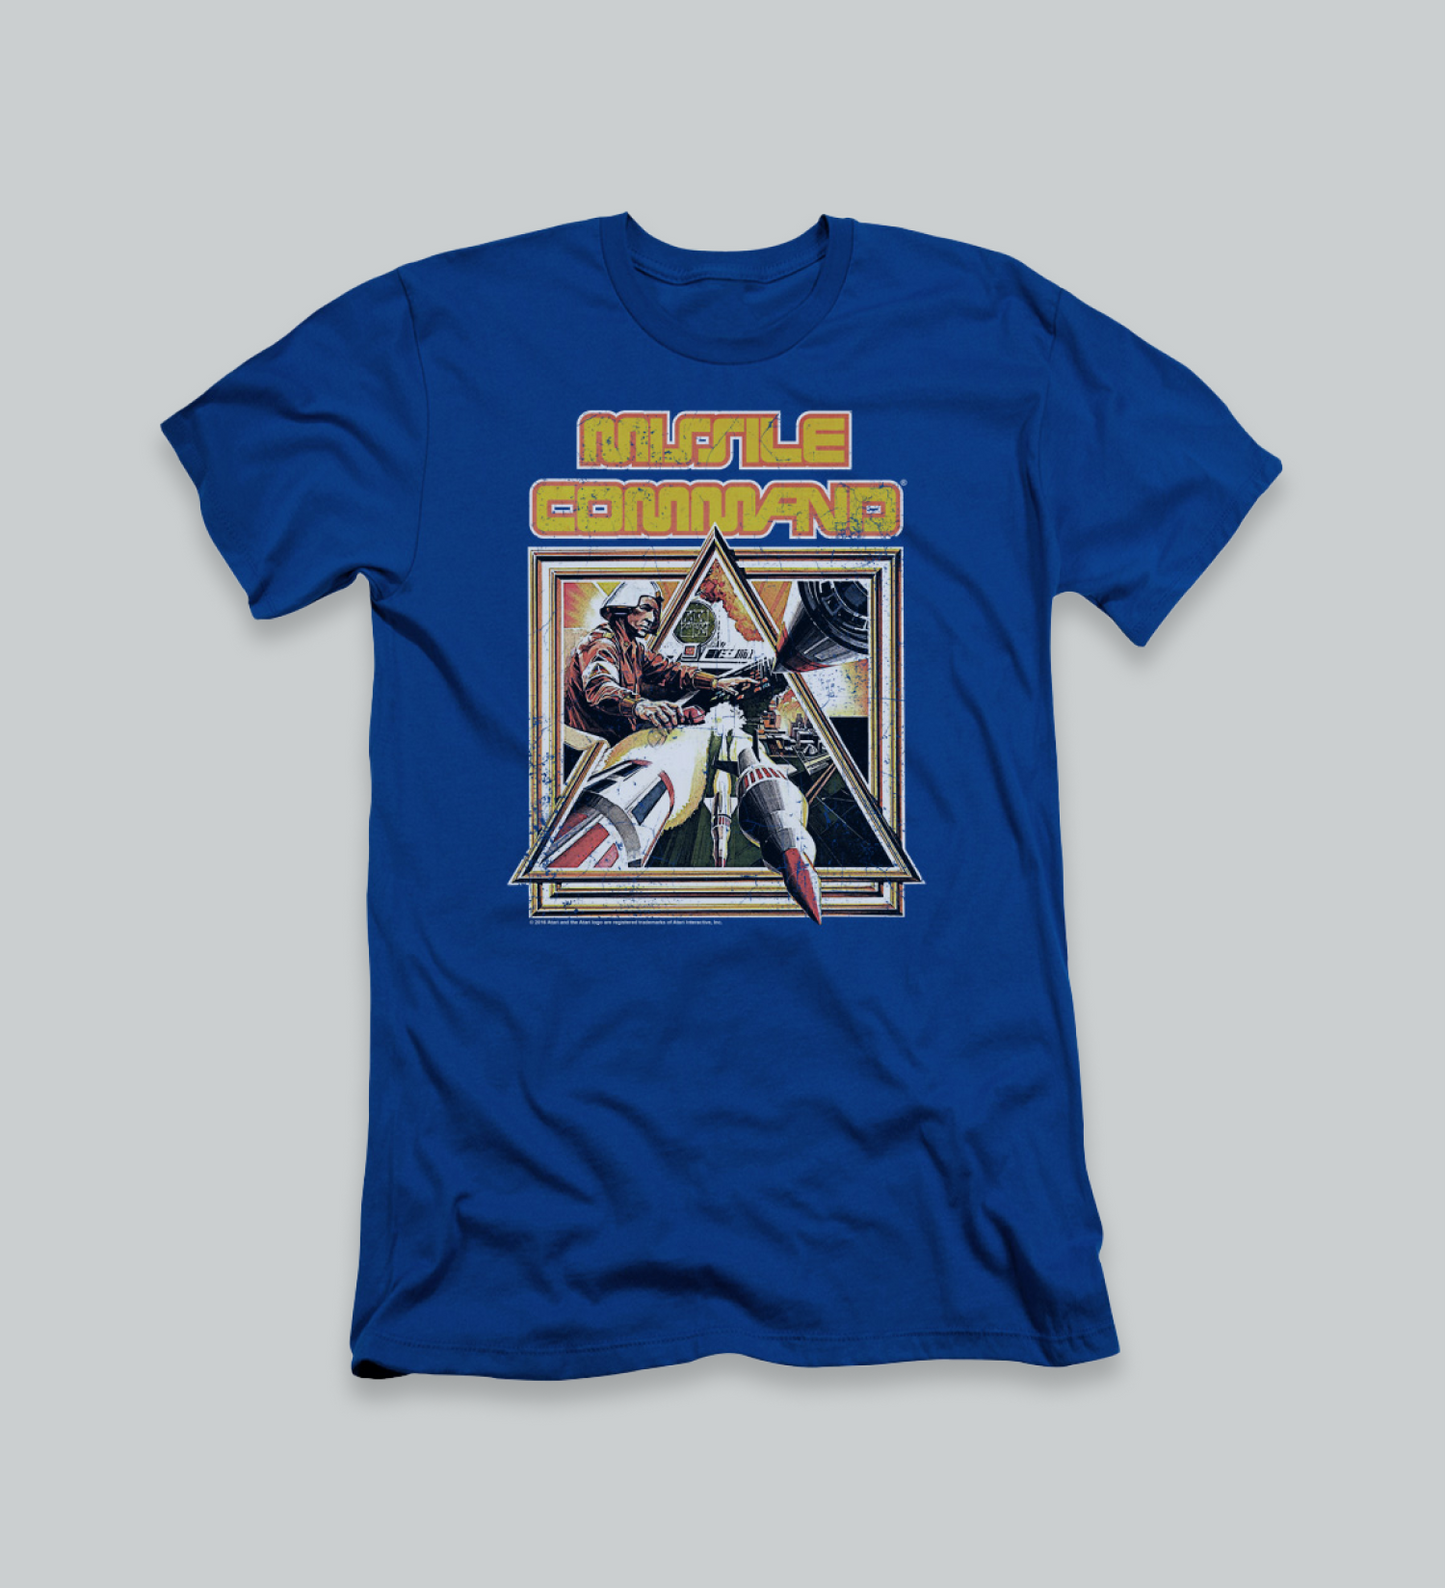 Missile Command Target Acquired Tee